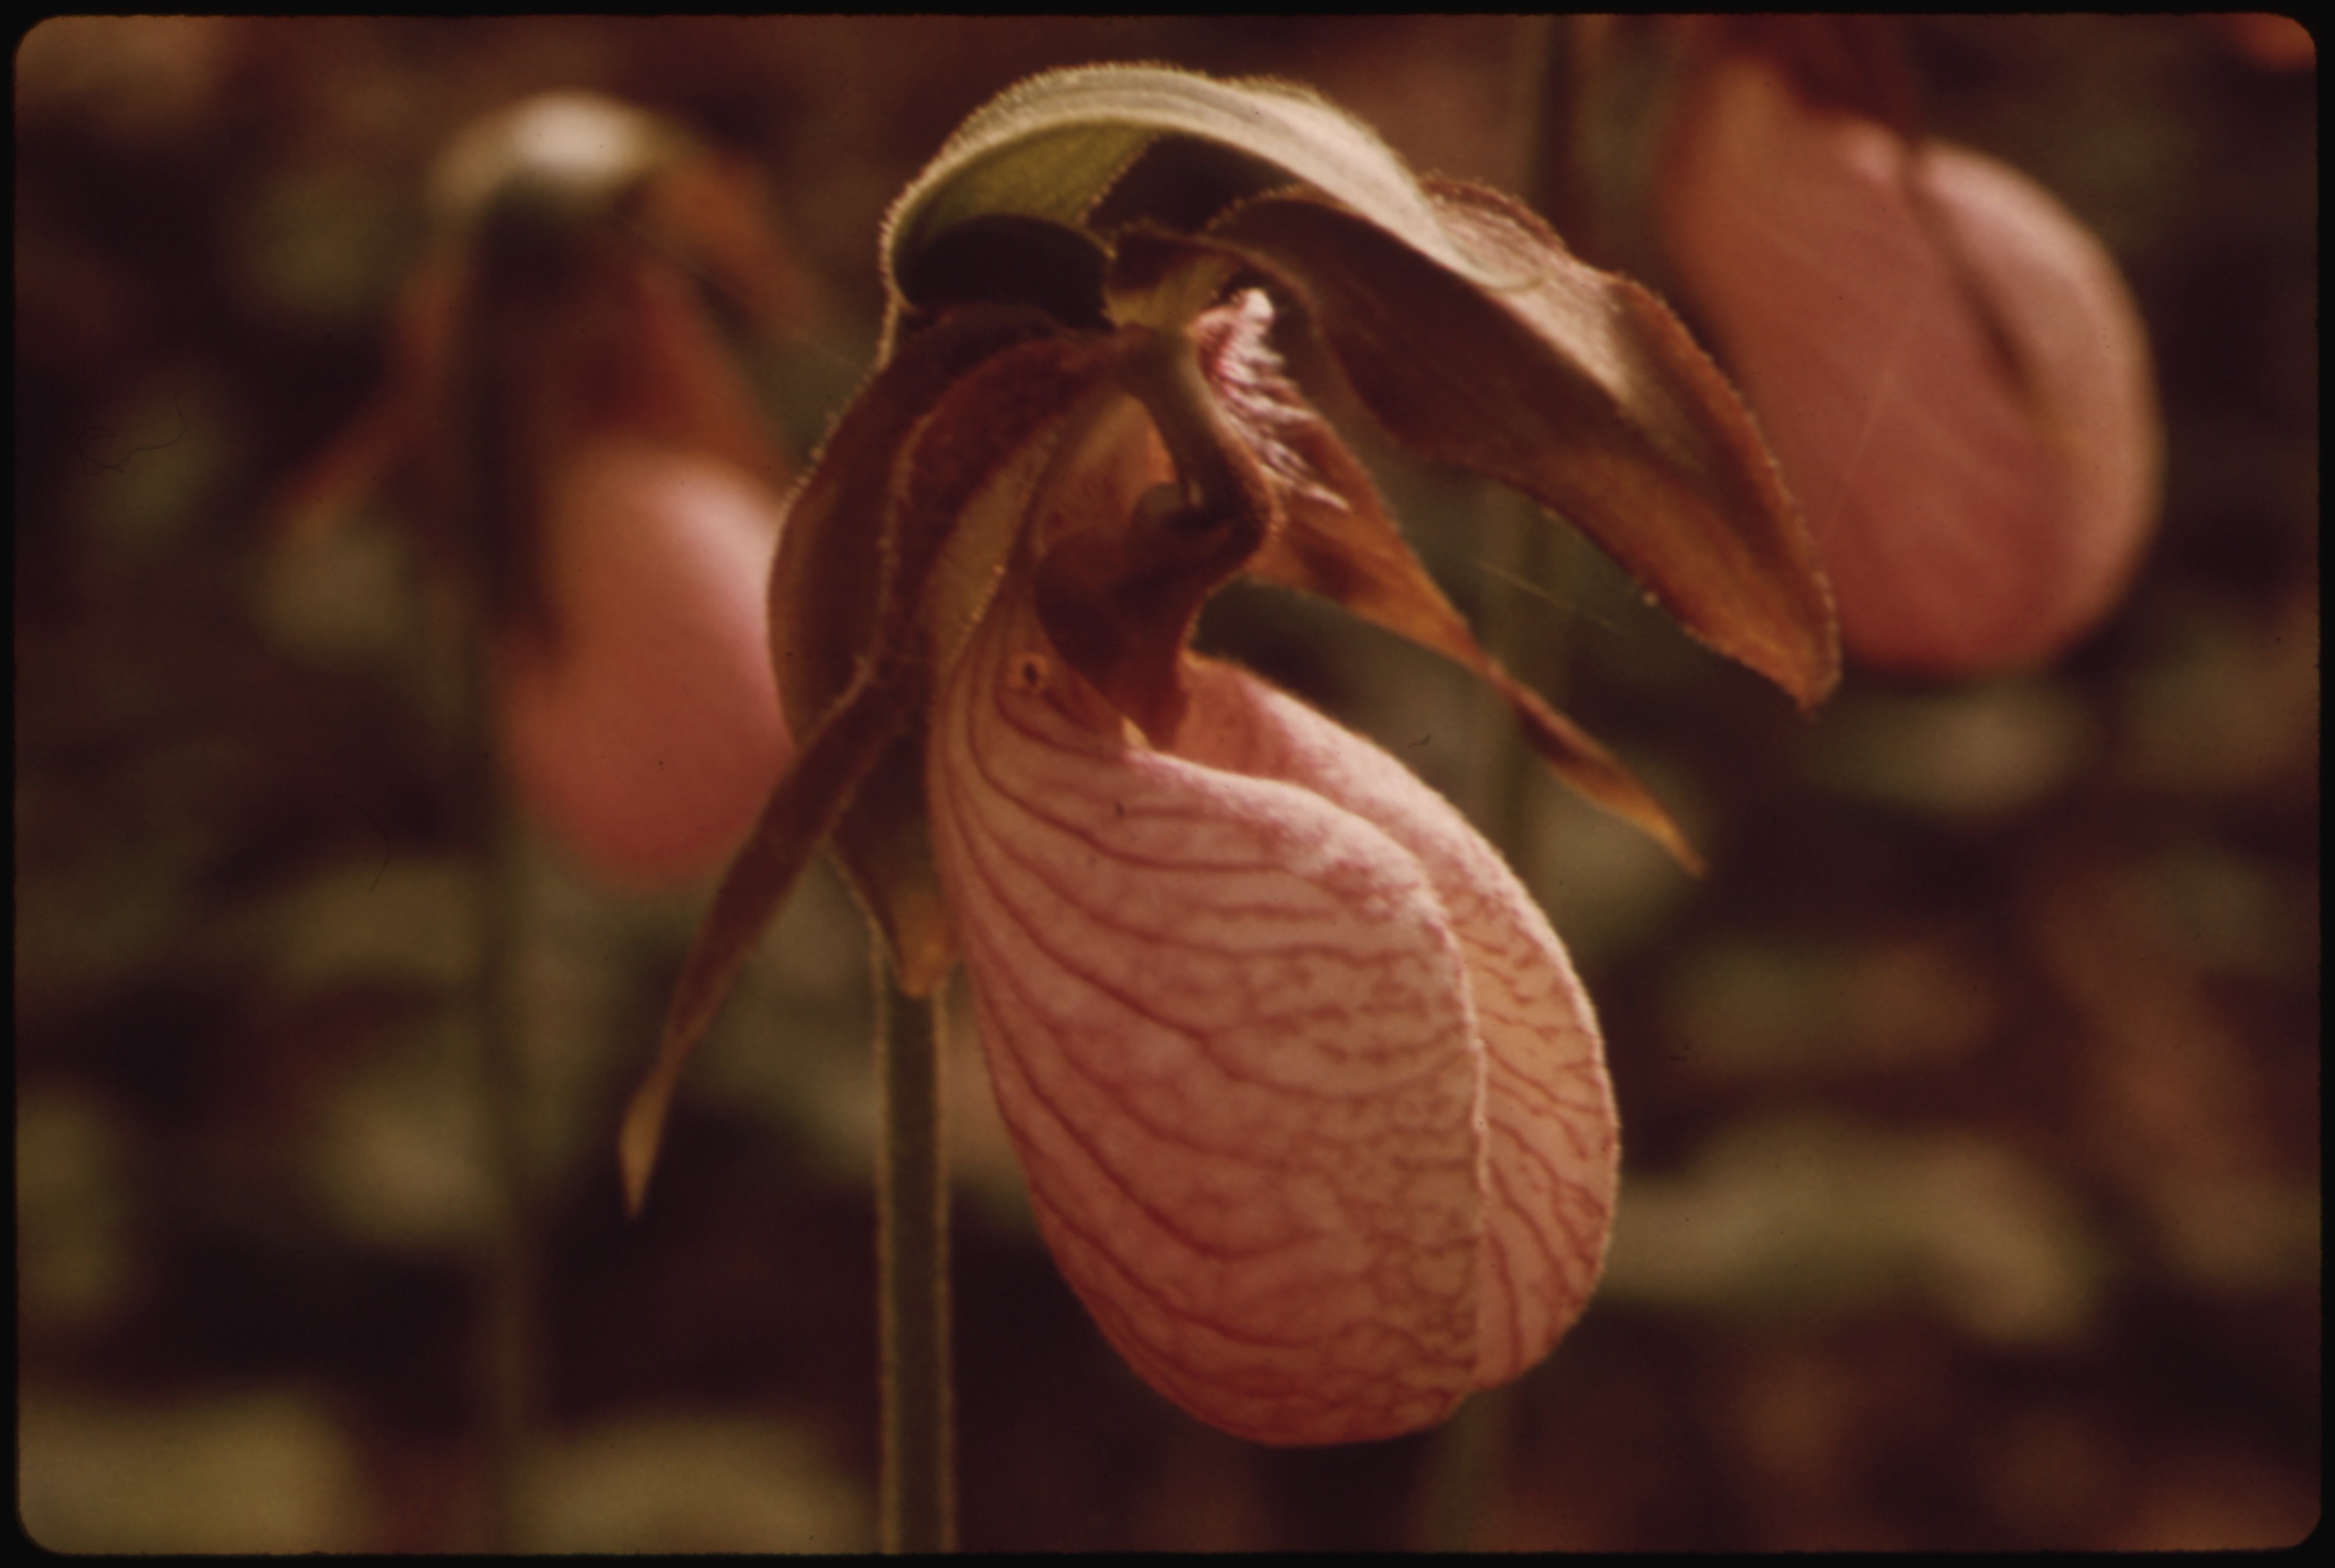 File:LADY SLIPPER, ONE OF THE MANY KINDS OF WILD FLOWERS GROWING ON ...